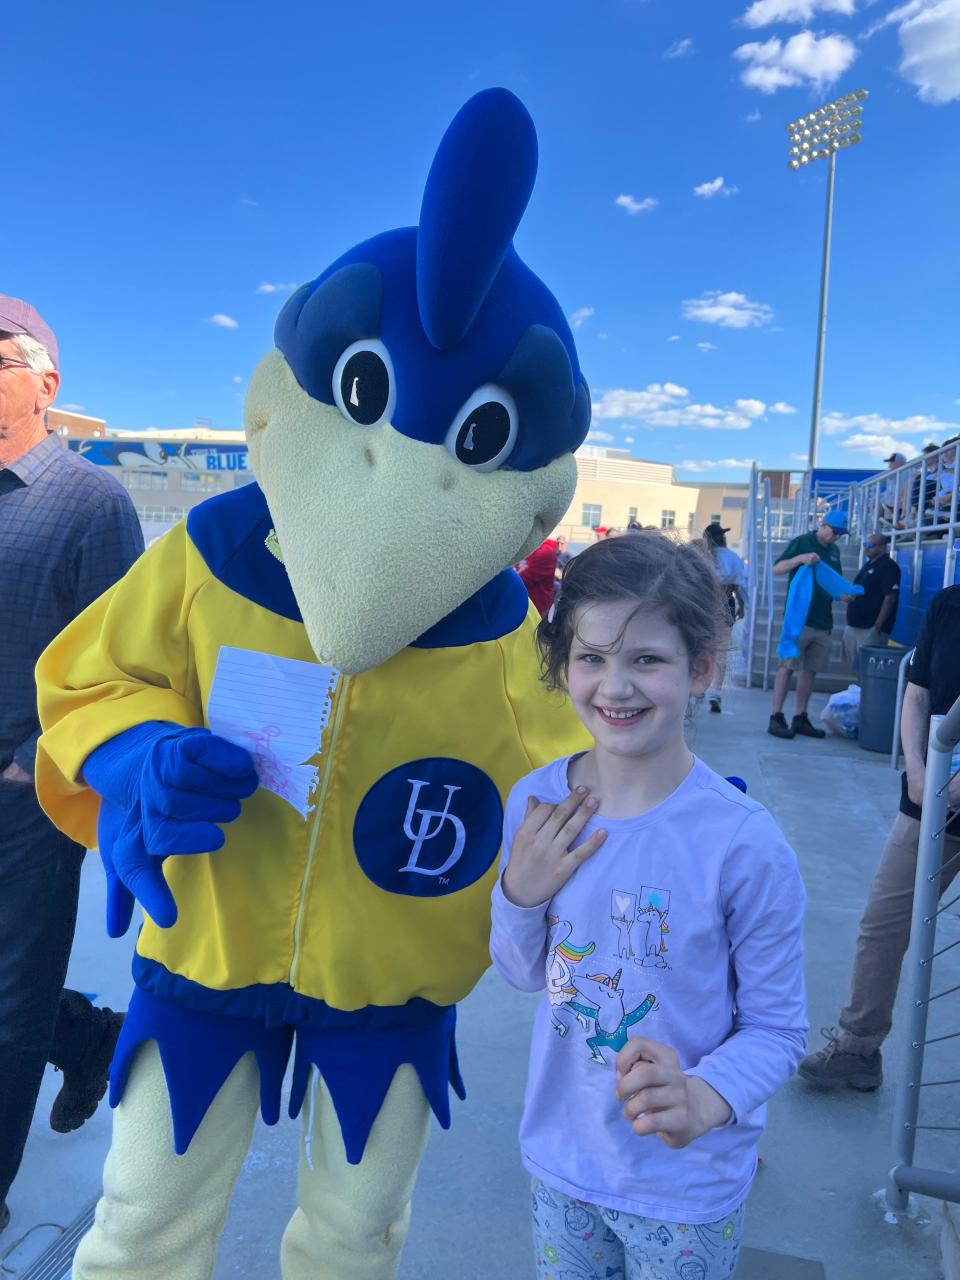 Cassie stands next to YoUDee, the University of Delaware's mascot.